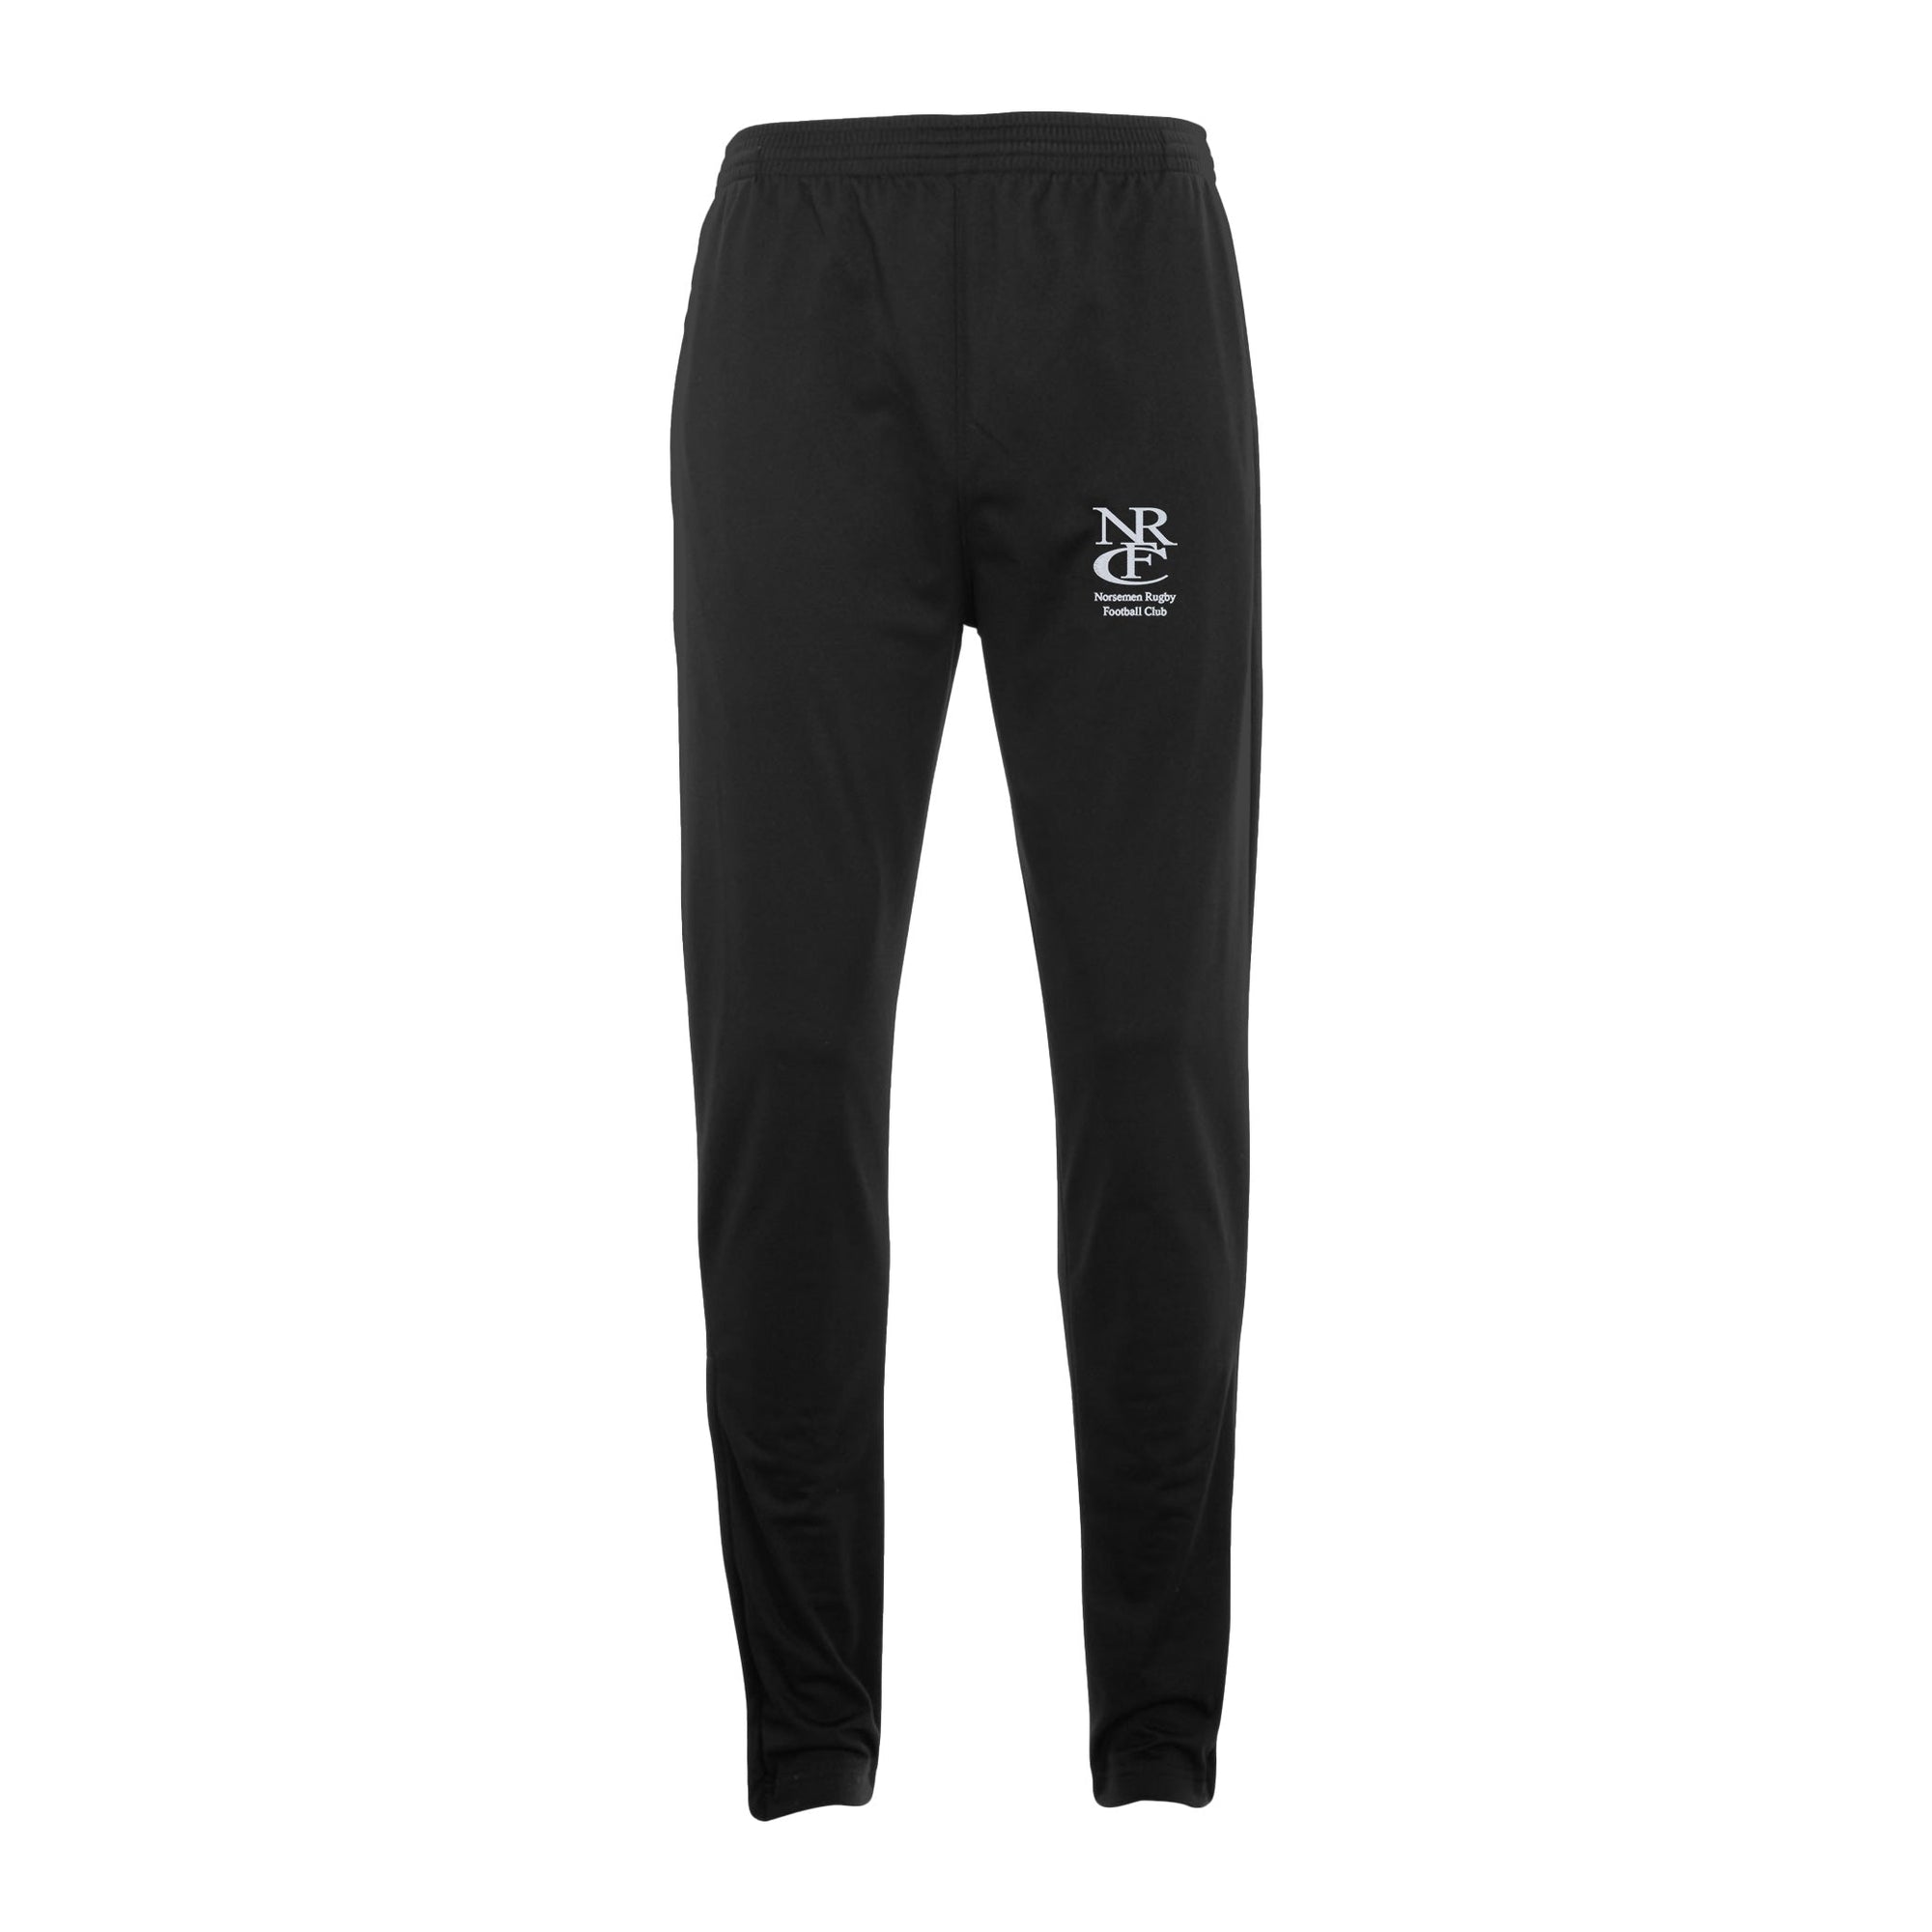 Rugby Imports Norsemen RFC Unisex Tapered Leg Pant